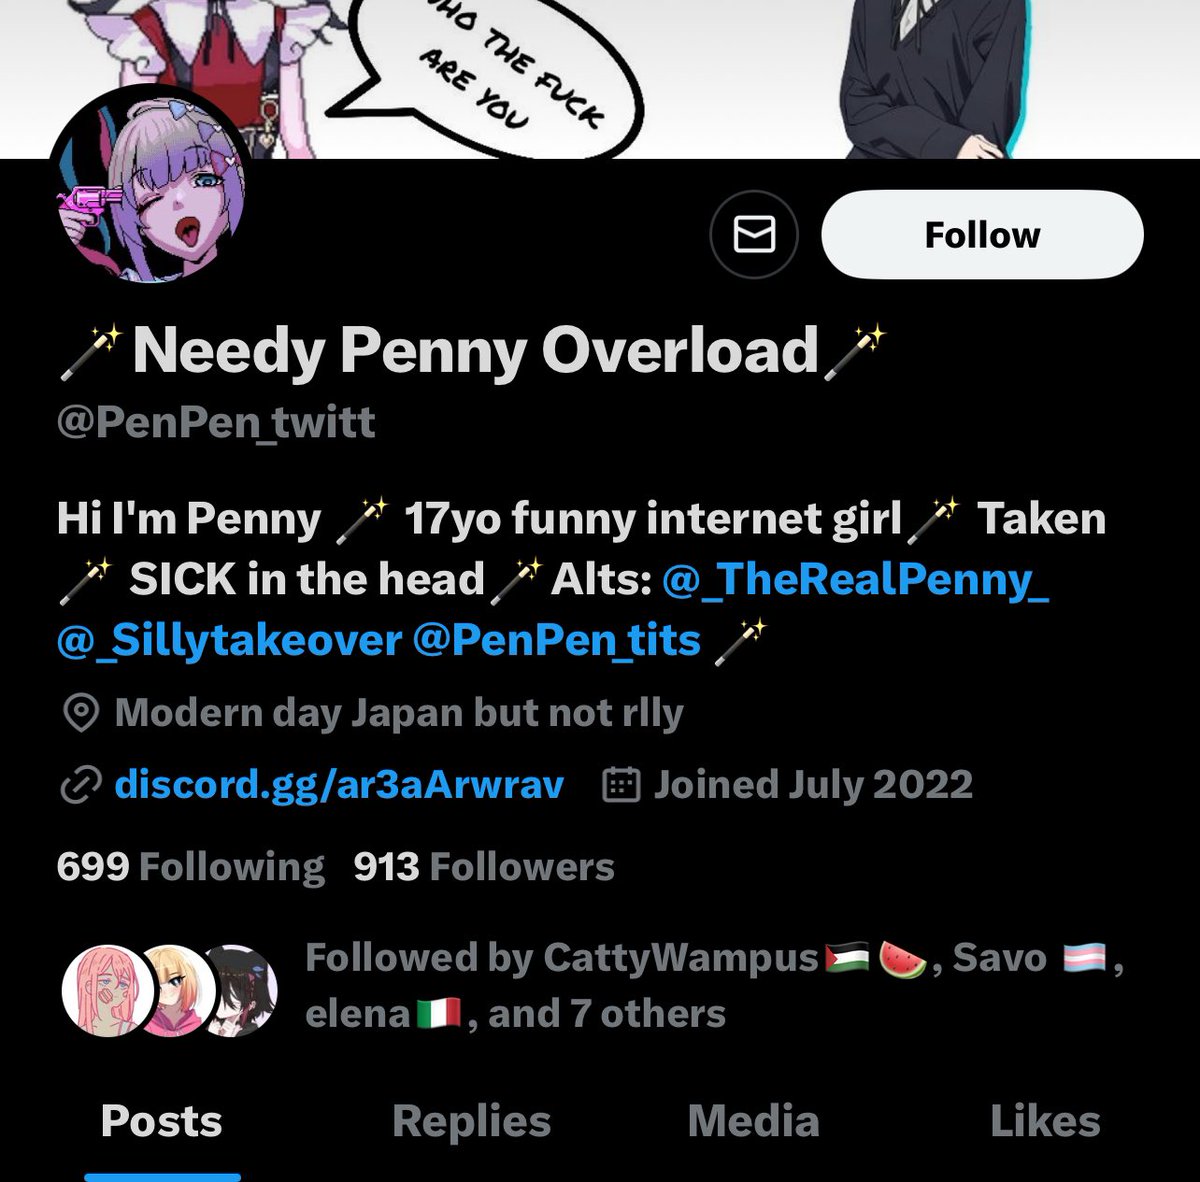 i ask everyone to unfollow @/PenPen_twitt.
my friend informed me this person likes incest, likes necrophilia, and is a lolicon. 

(screenshots in thread bc i cant fit them all.)